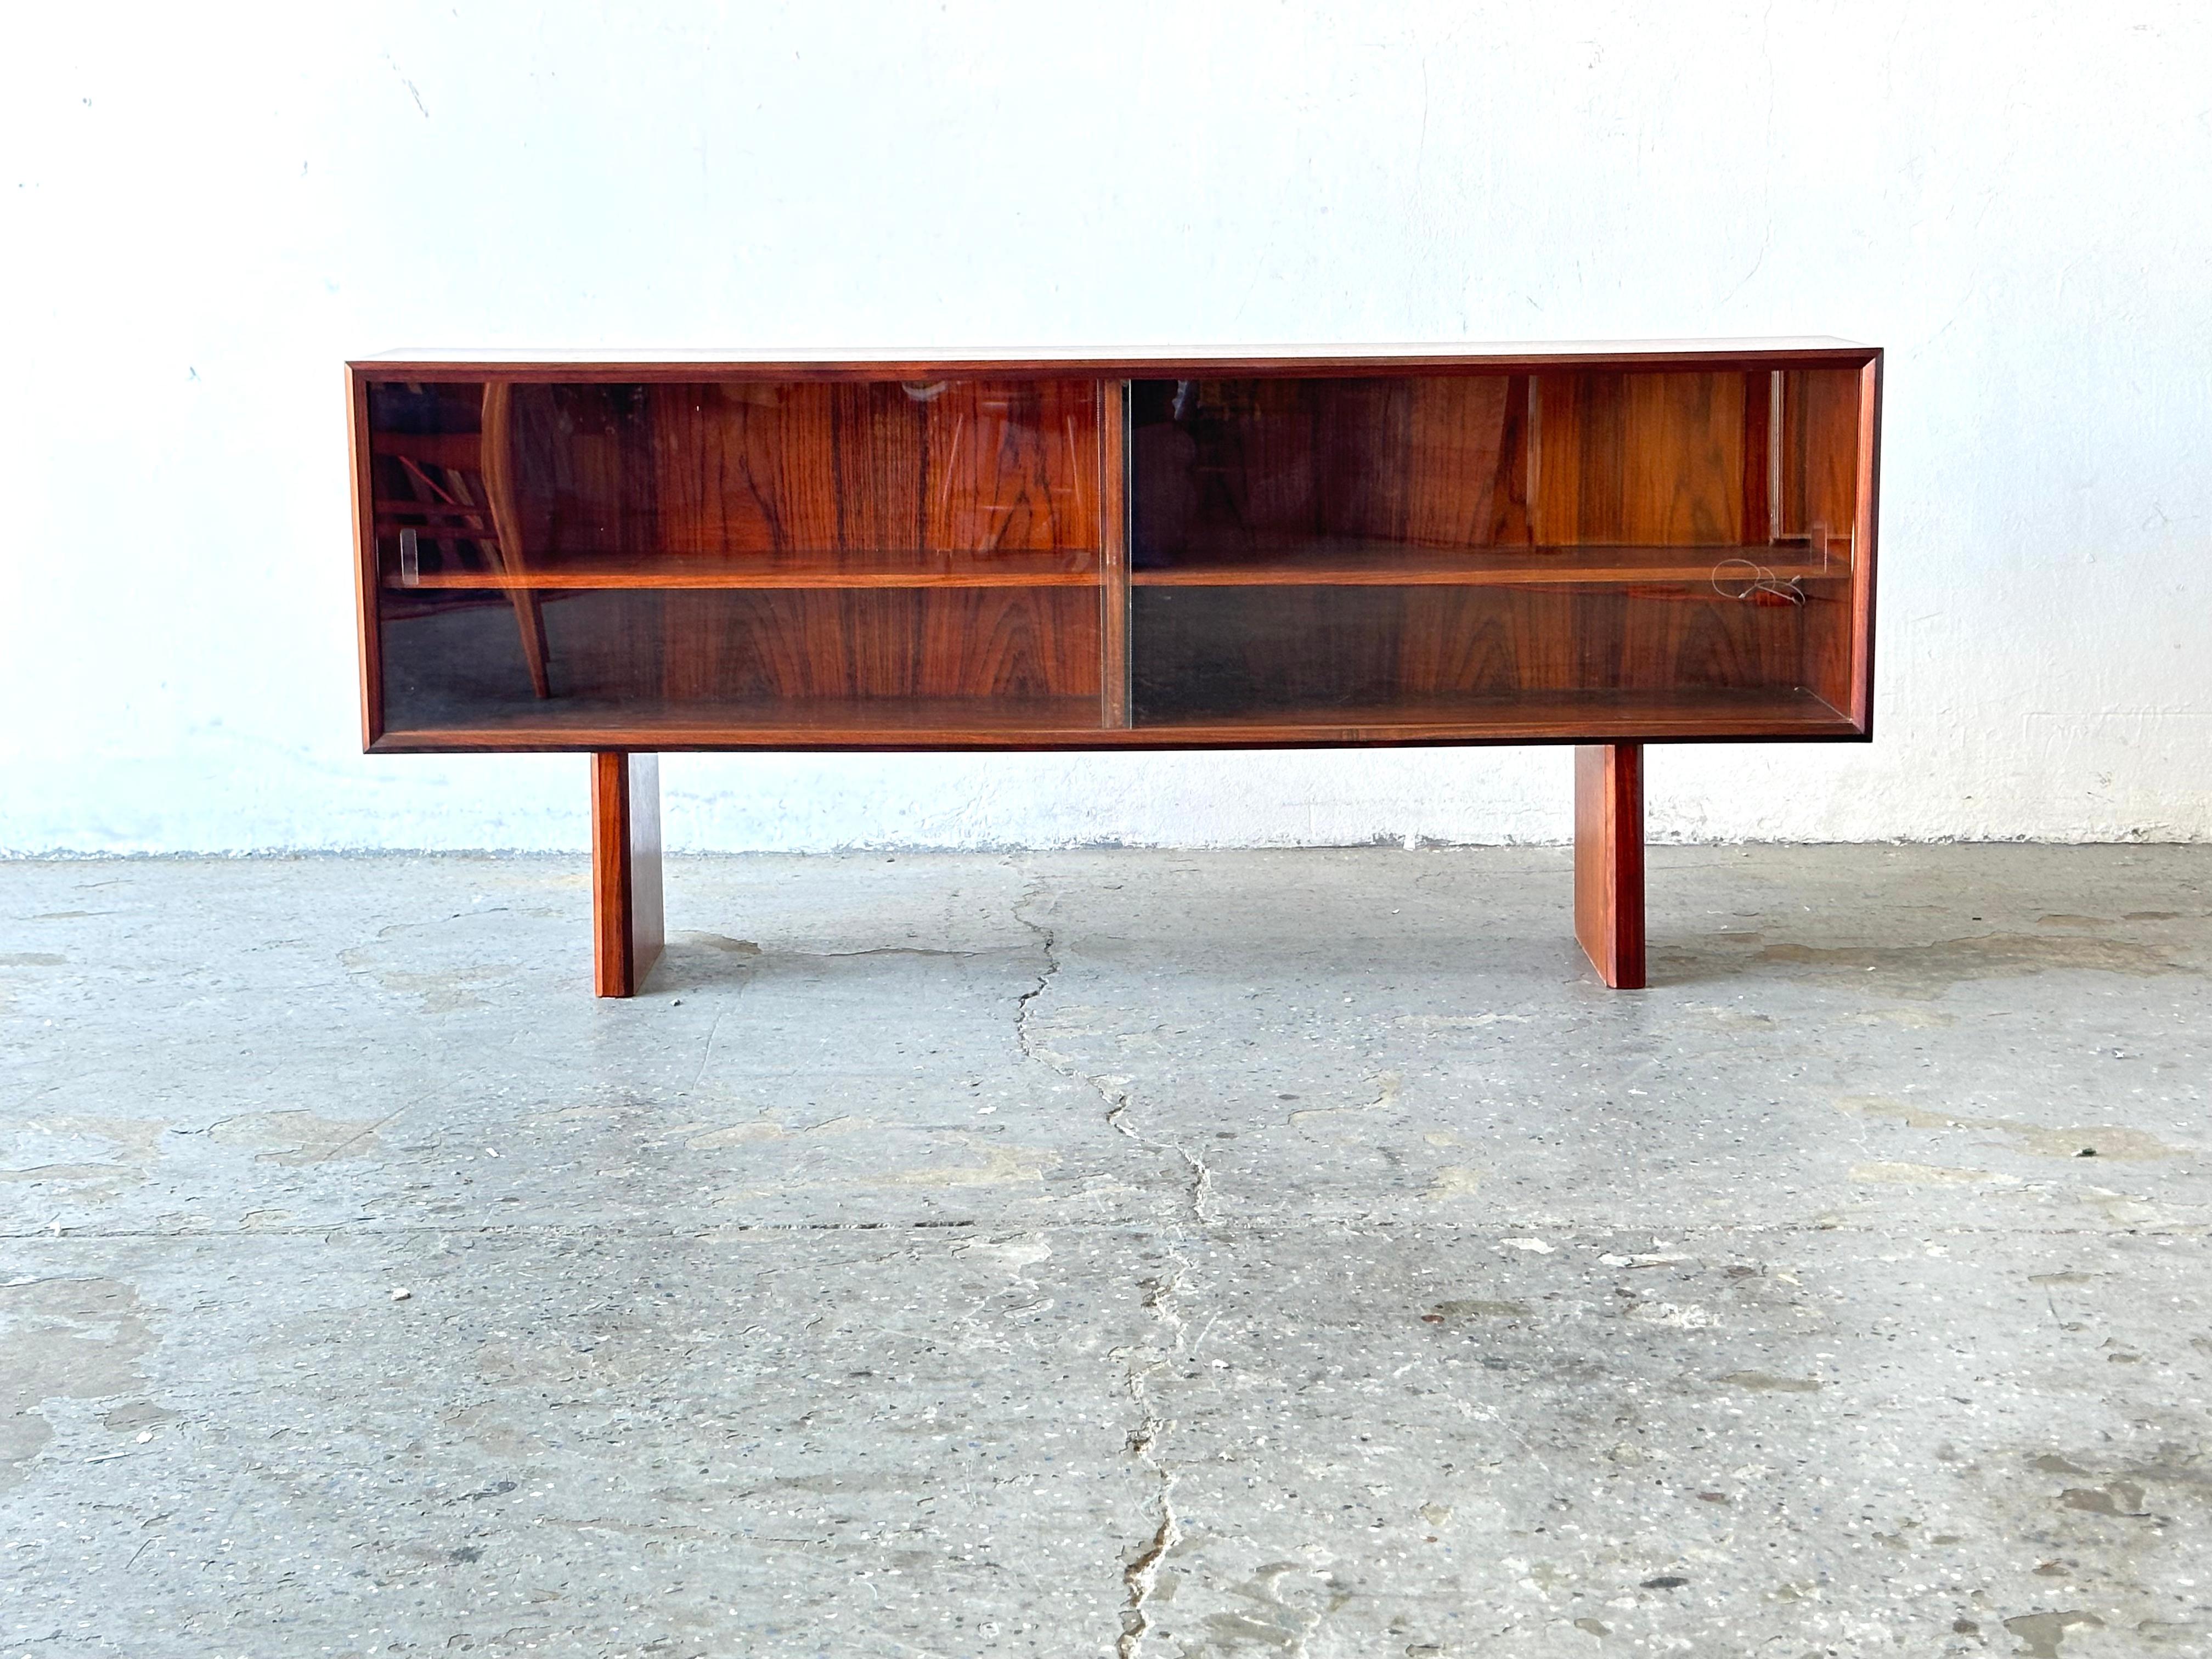 MCM Danish modern Rosewood Low Media Cabinet or Bookshelf display Case. By faarup mobelfabrik
Need a place to store books, glassware or something else cool that you like to collect? This mid century modern cabinet with glass doors is a great